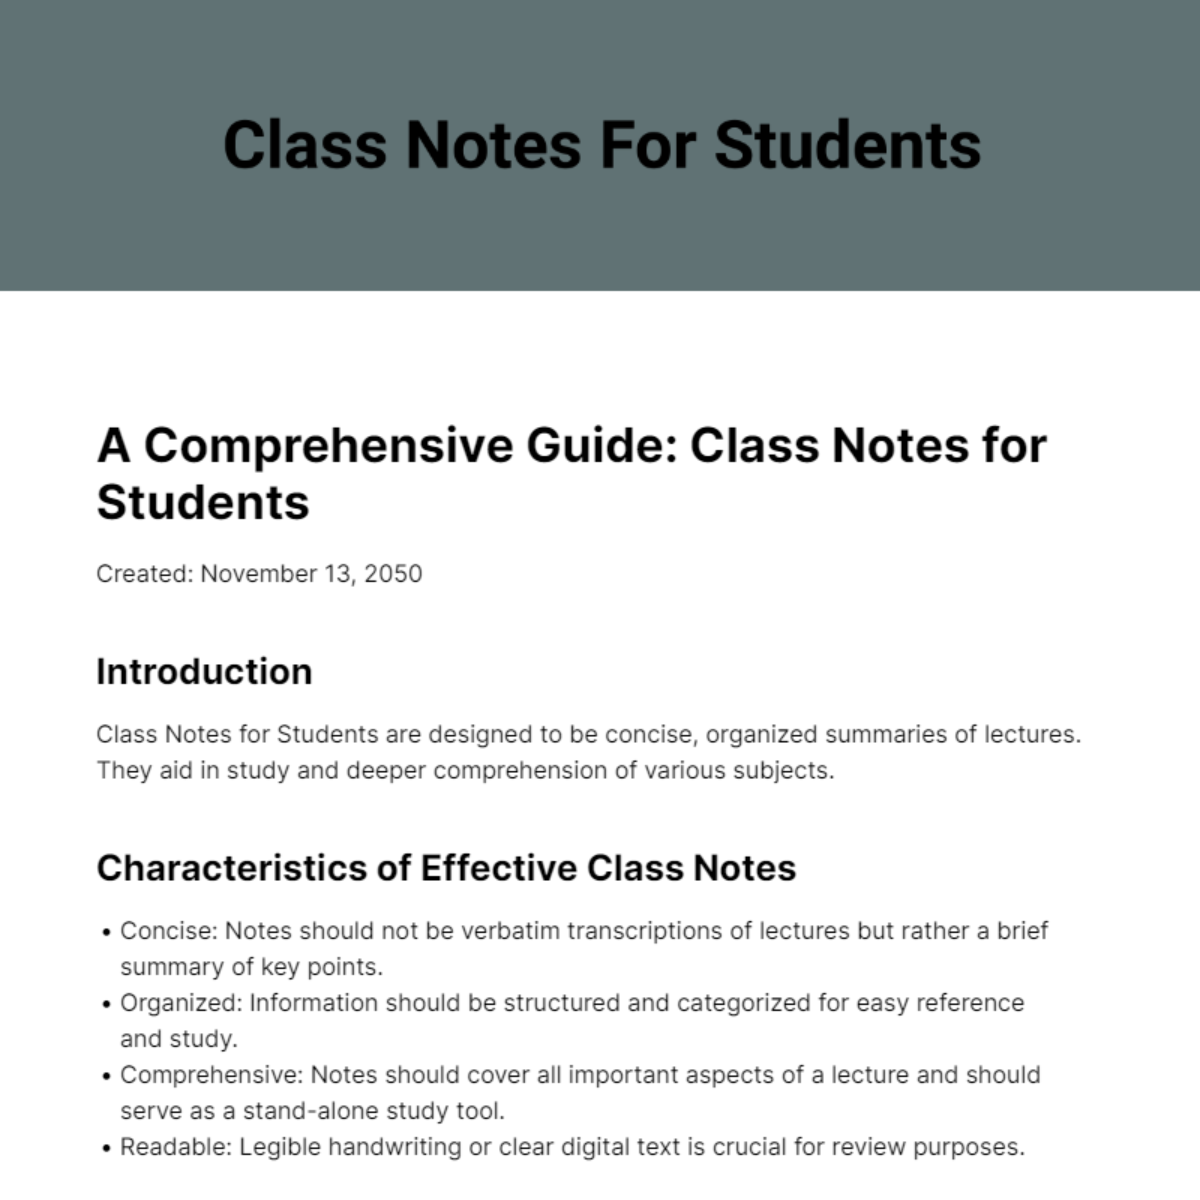 Free Class Note for Students Template